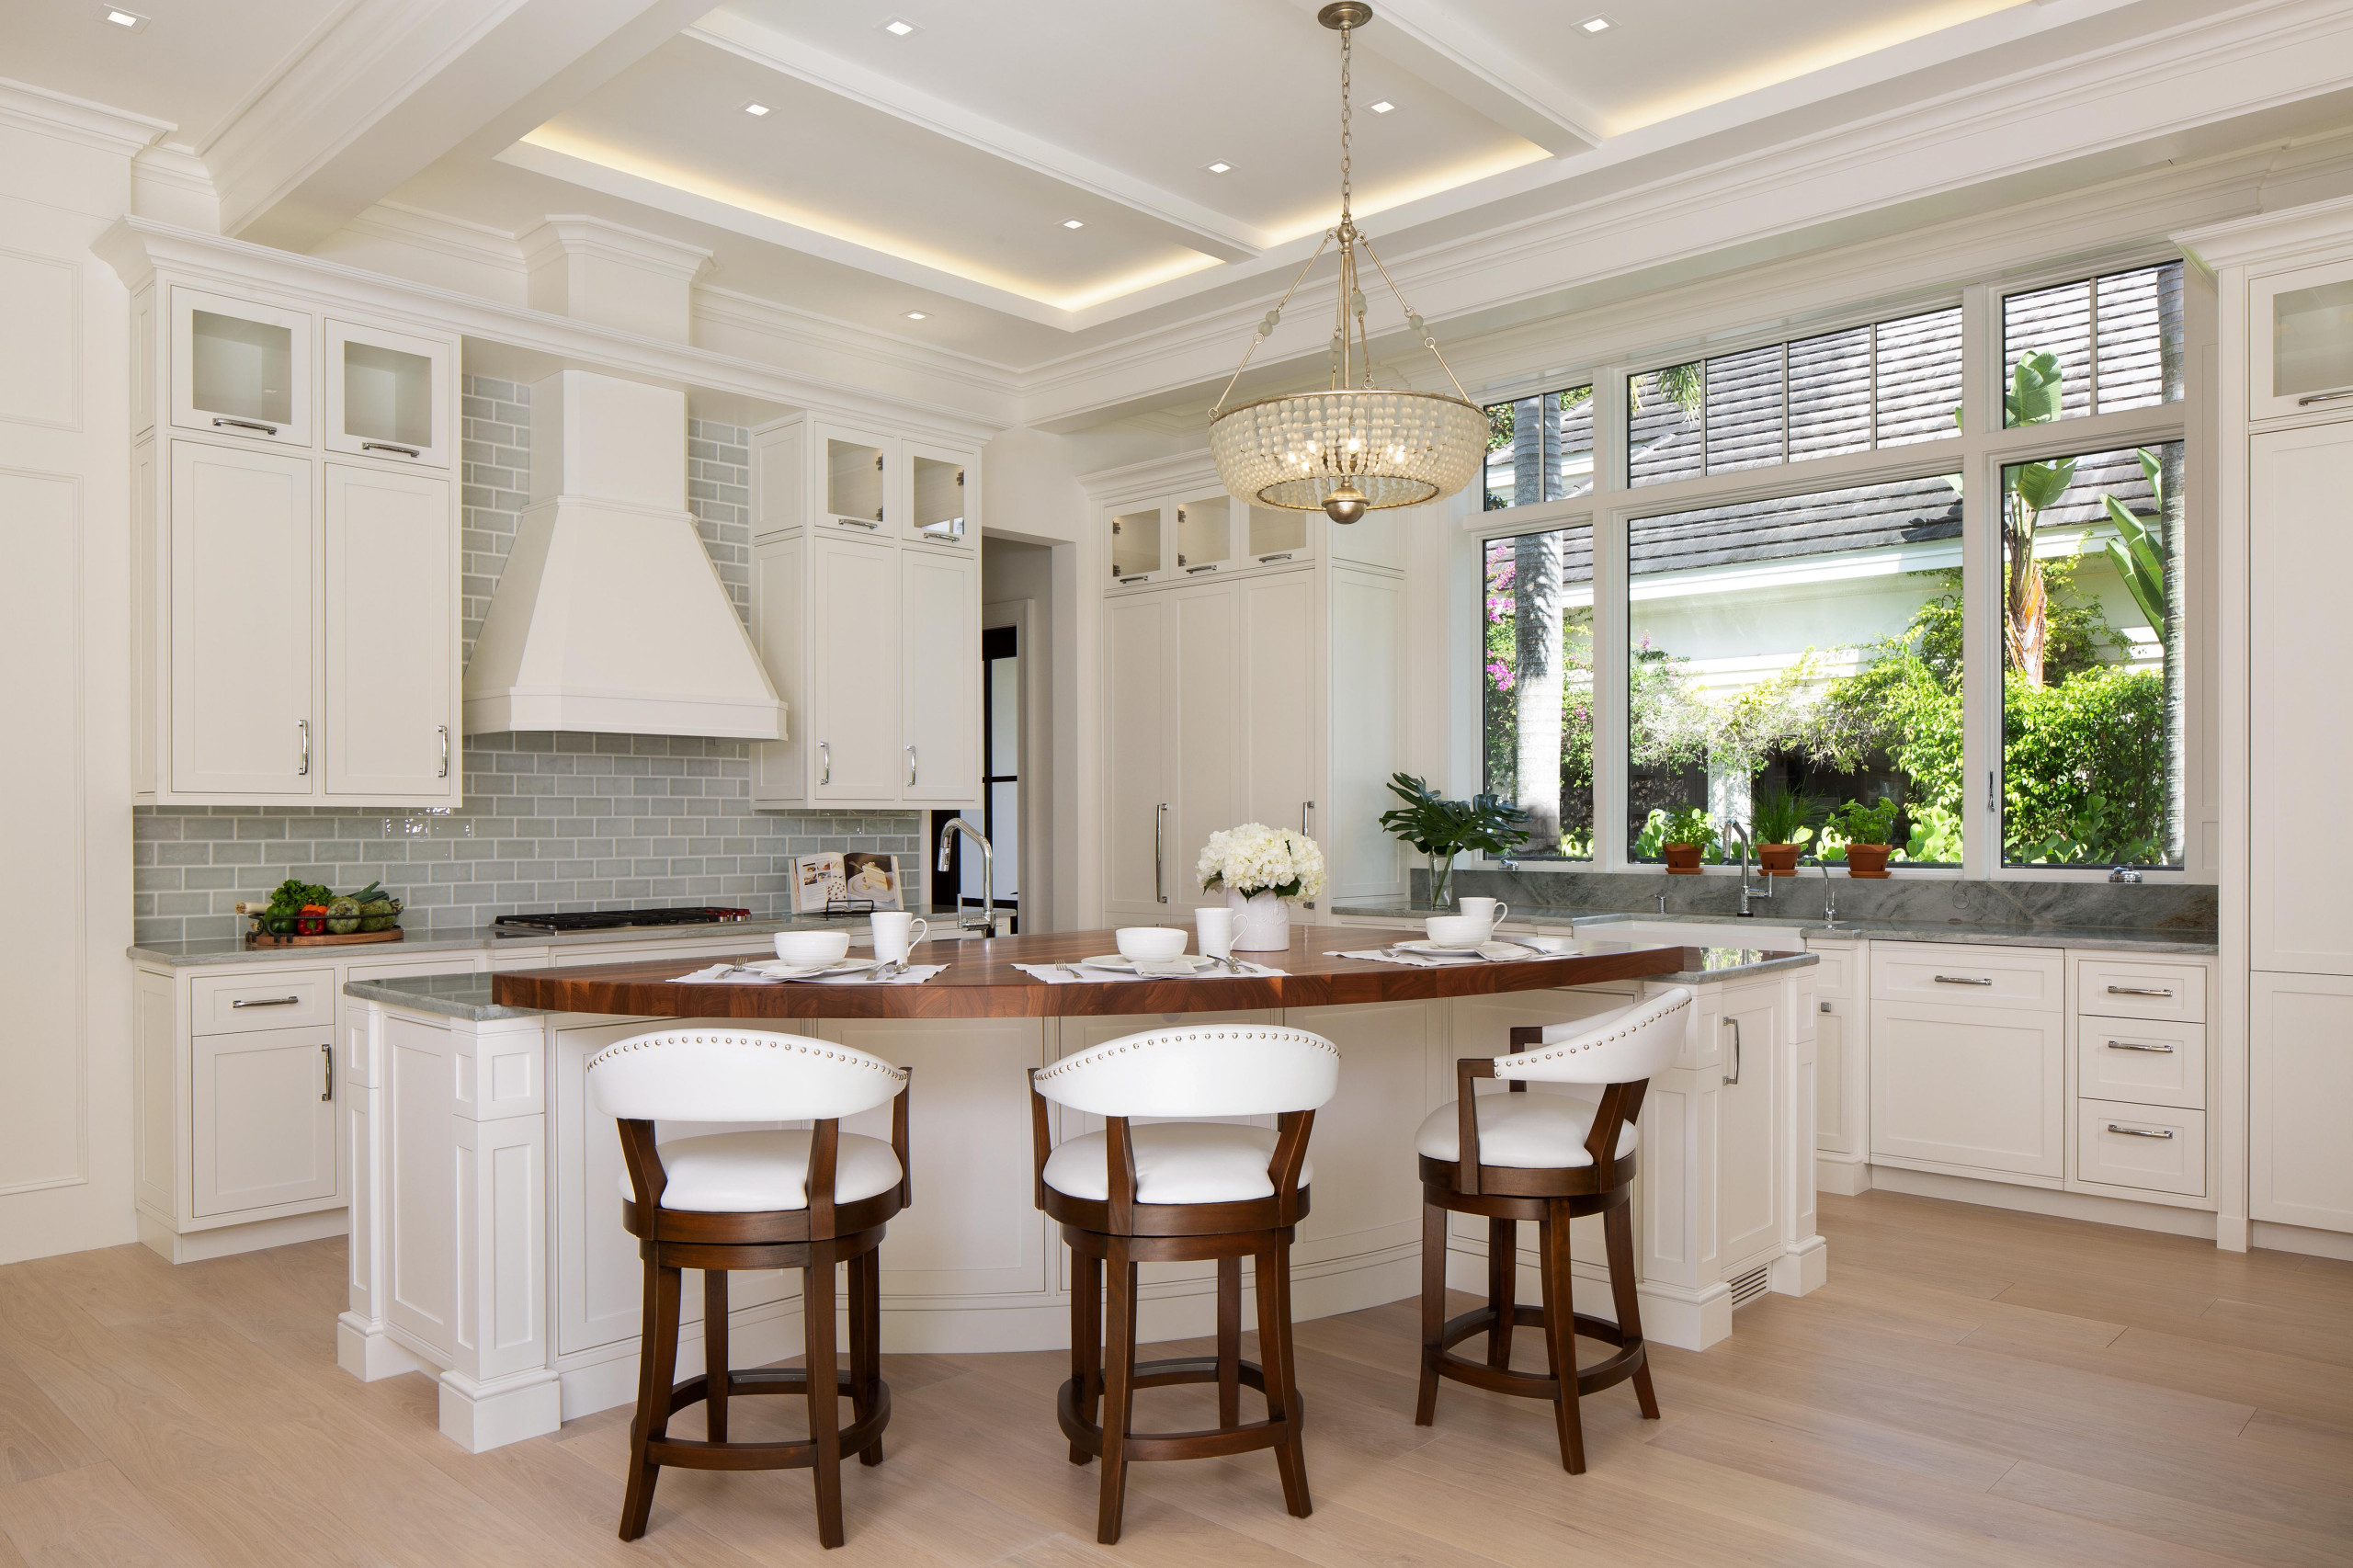 20 All Ceiling Designs Kitchen Ideas You'll Love   June, 20   Houzz